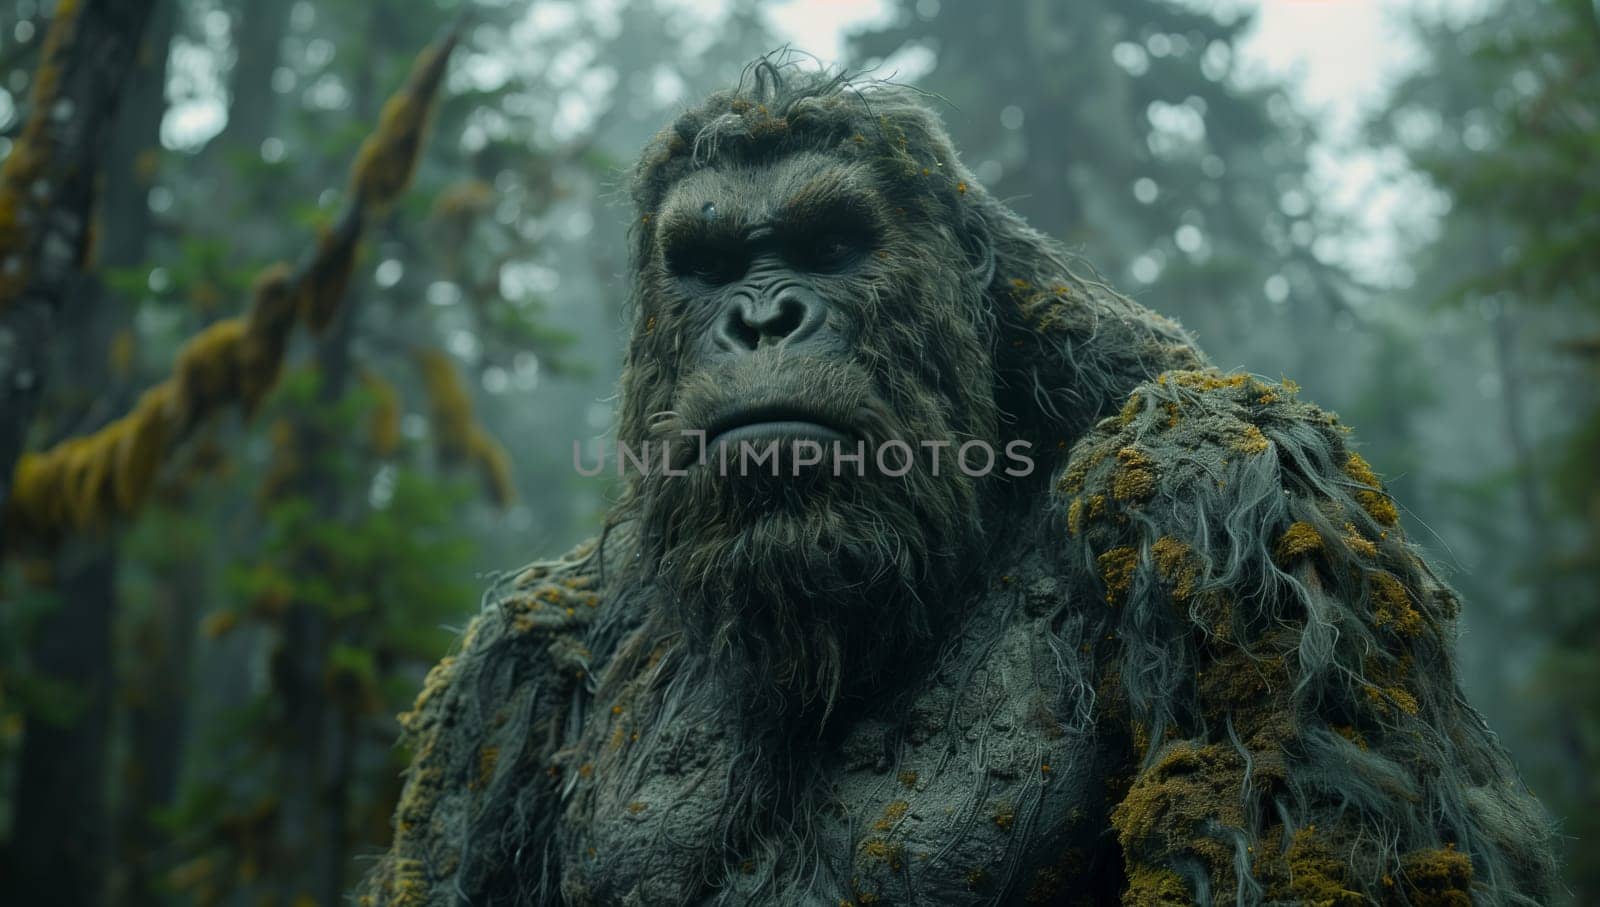 A large gorilla sits in the forest, surrounded by trees and grass by richwolf